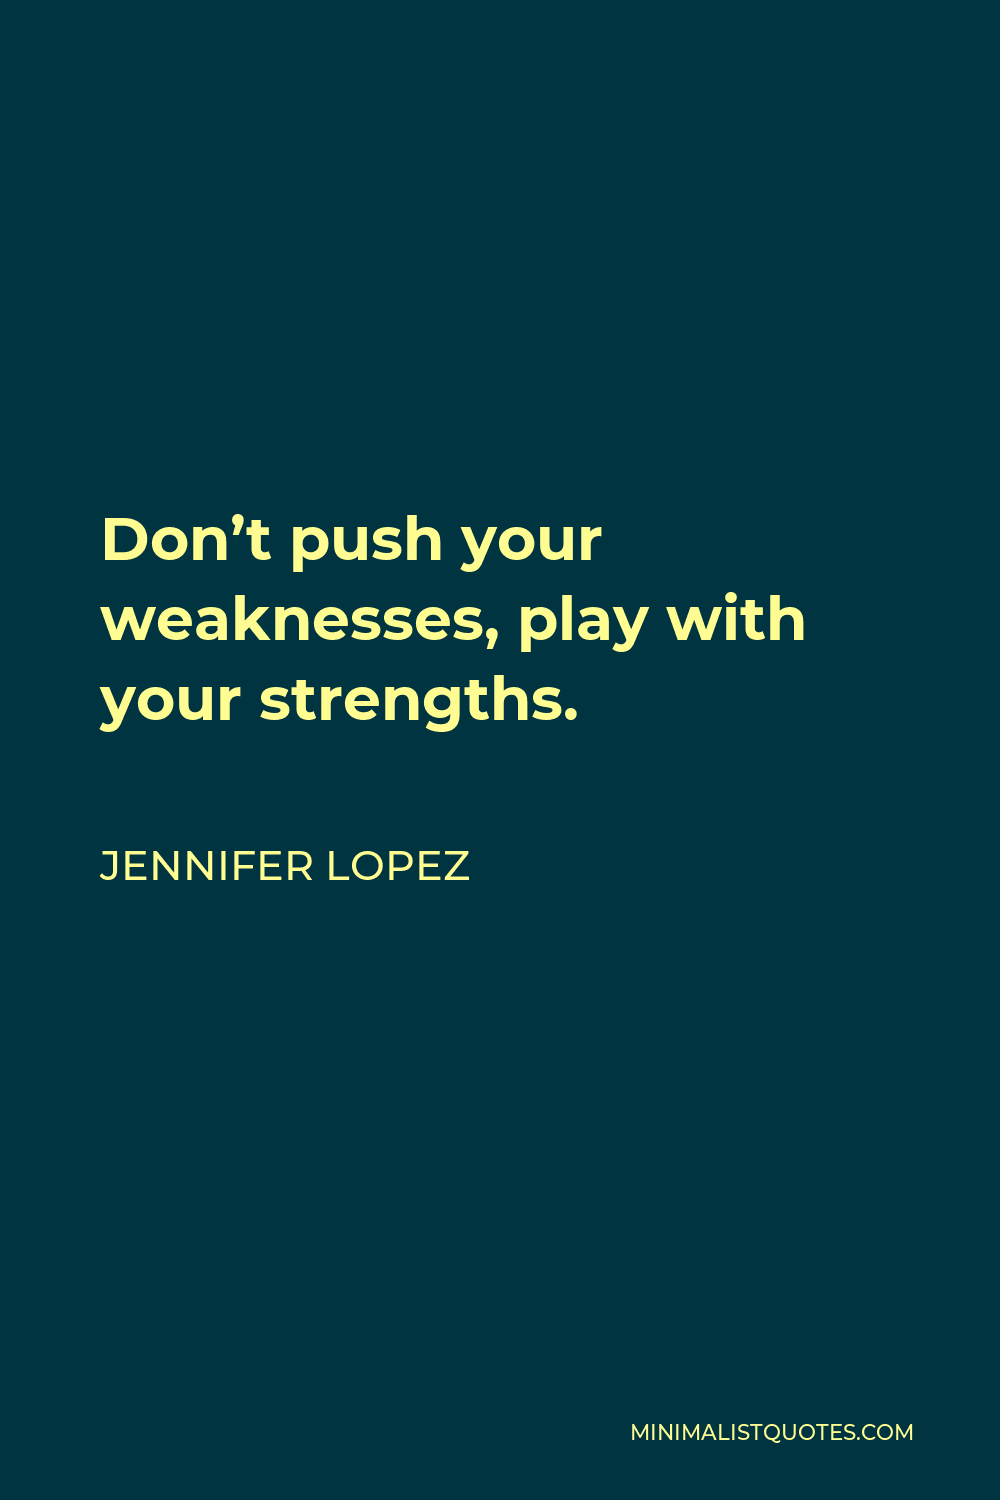 Jennifer Lopez Quote - Don’t push your weaknesses, play with your strengths.